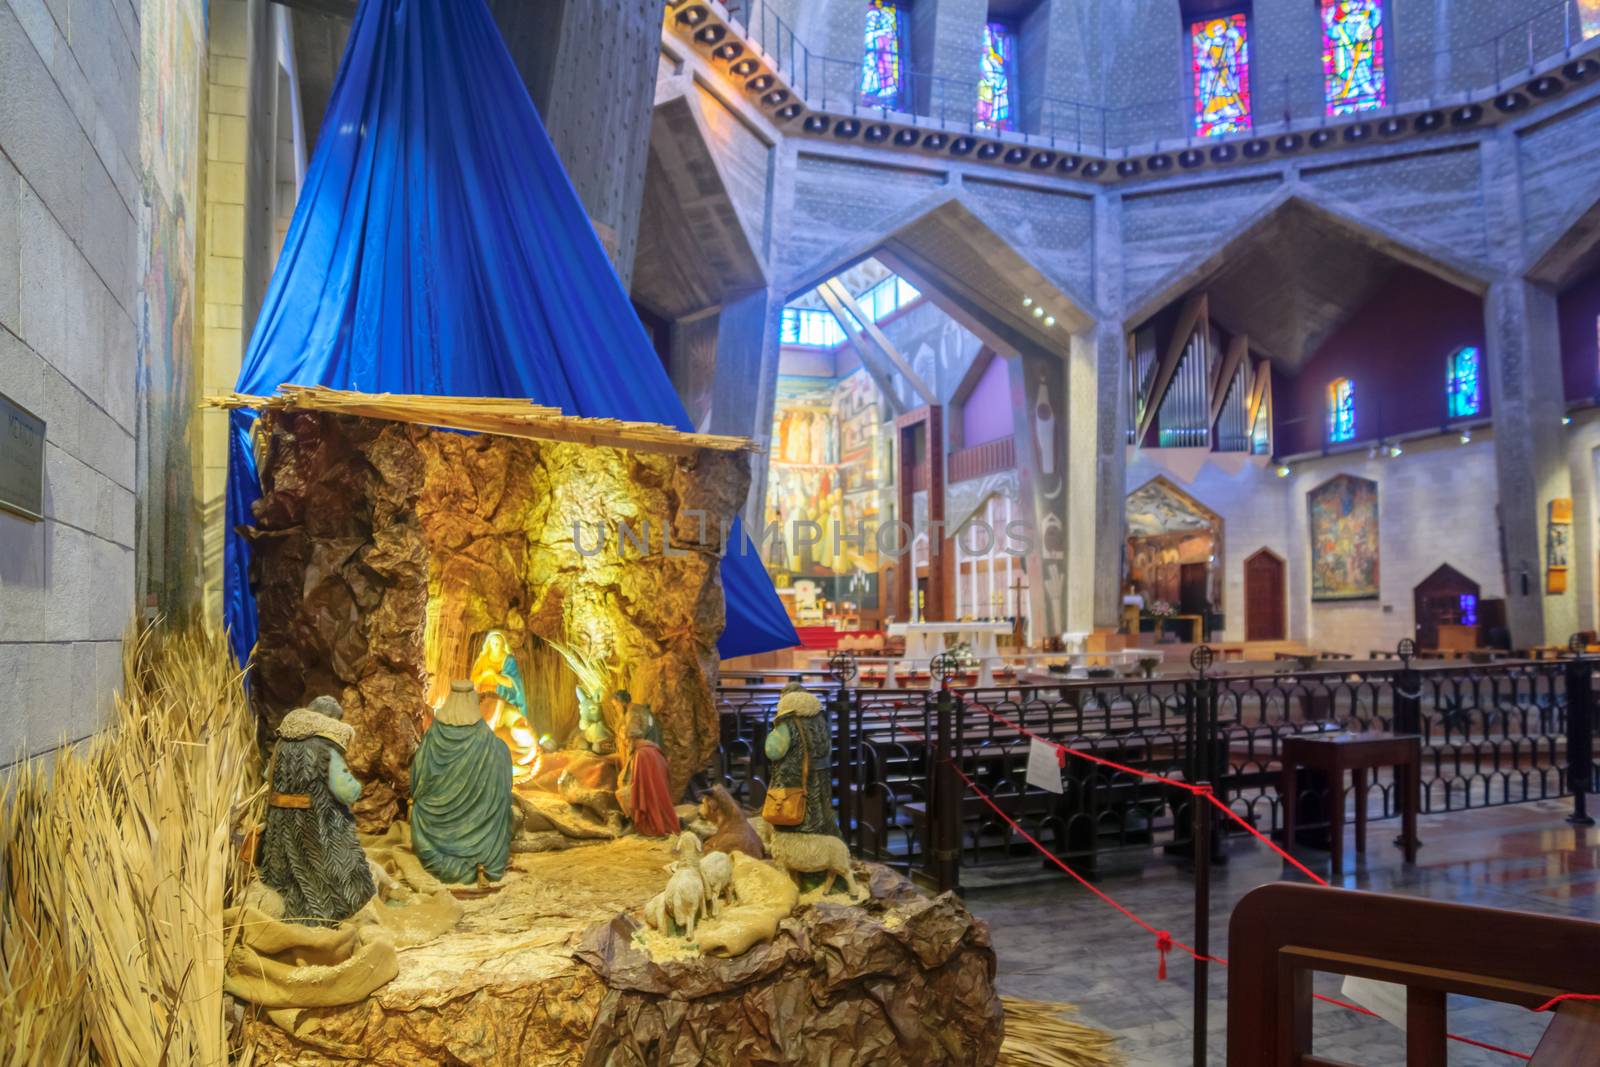 NAZARETH, ISRAEL - DECEMBER 20, 2016: The nativity scene, in the Church of the Annunciation, in Nazareth, Israel